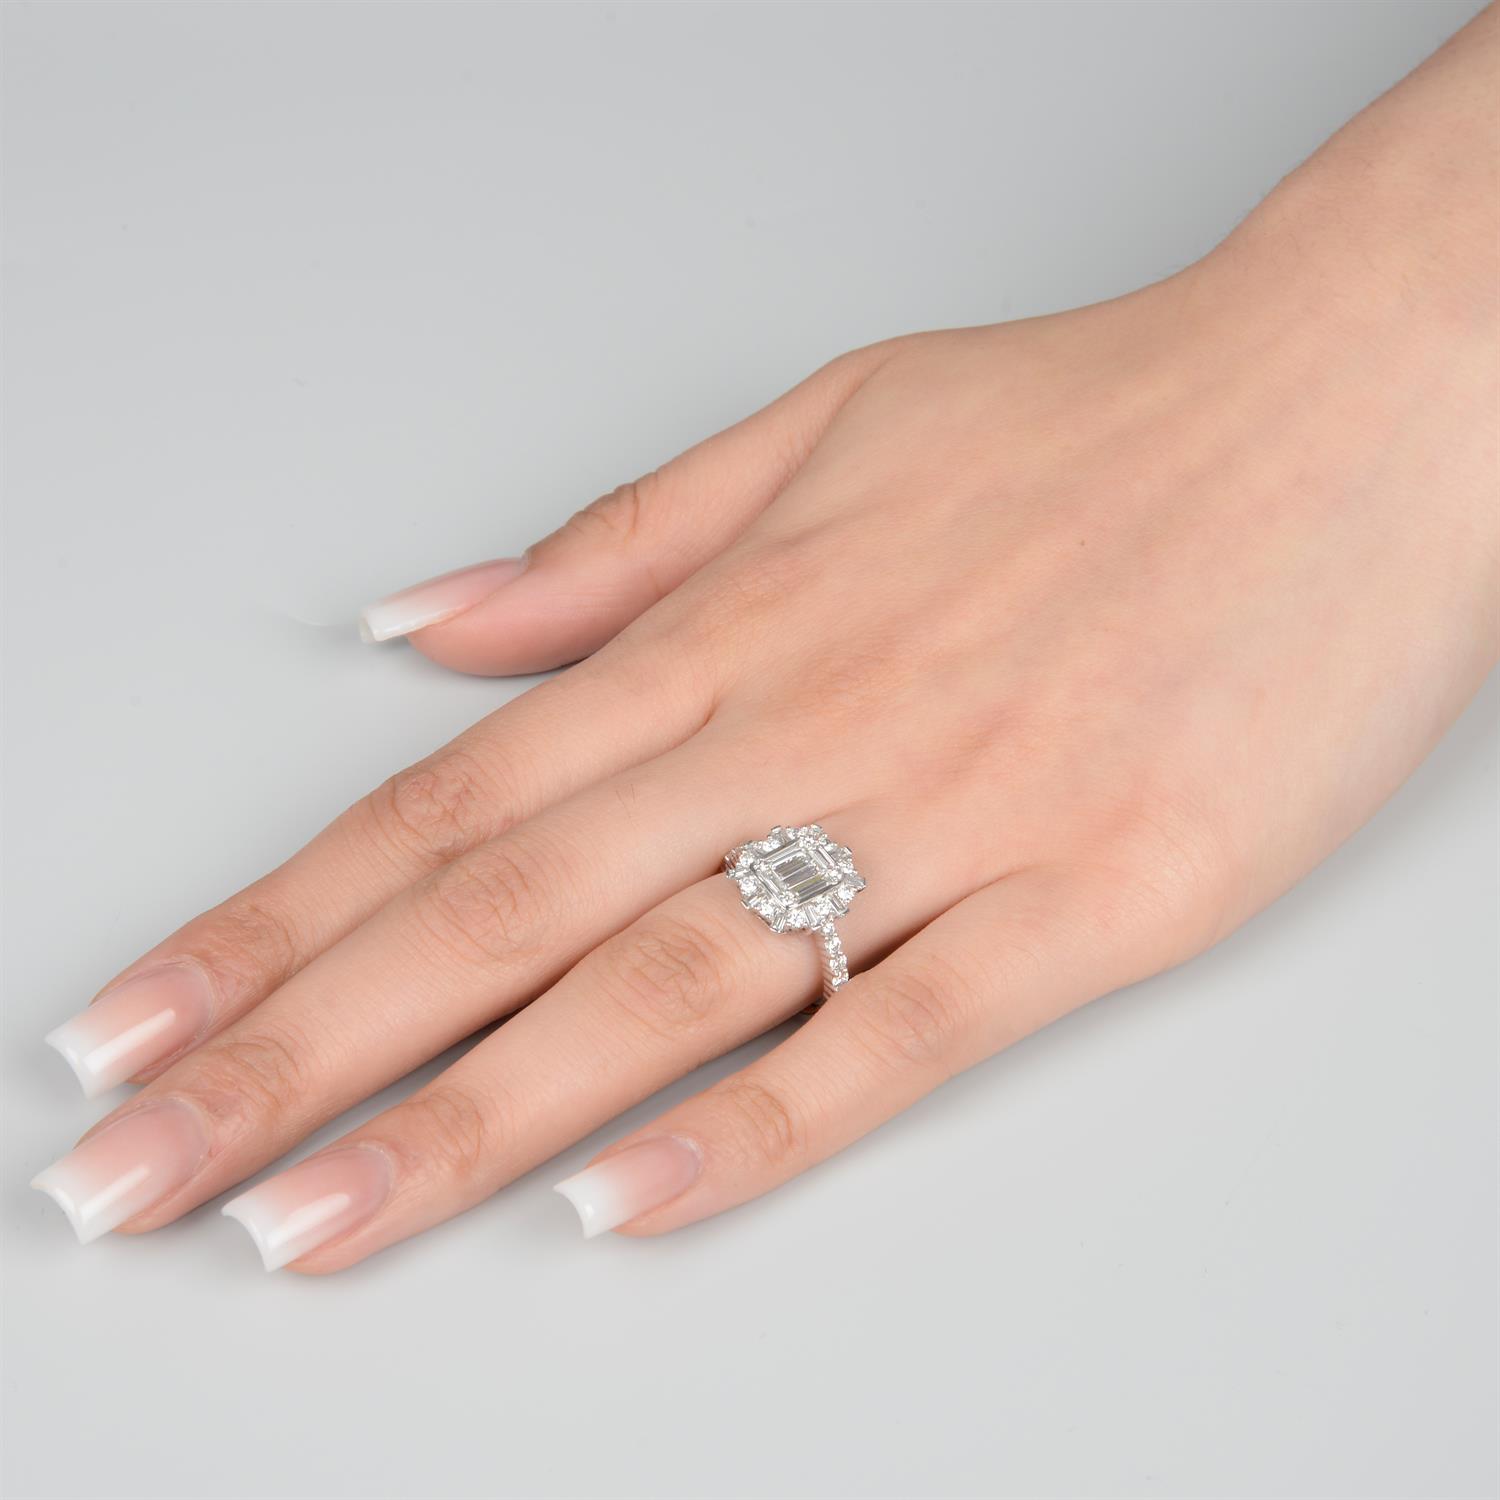 Diamond cluster ring - Image 6 of 6